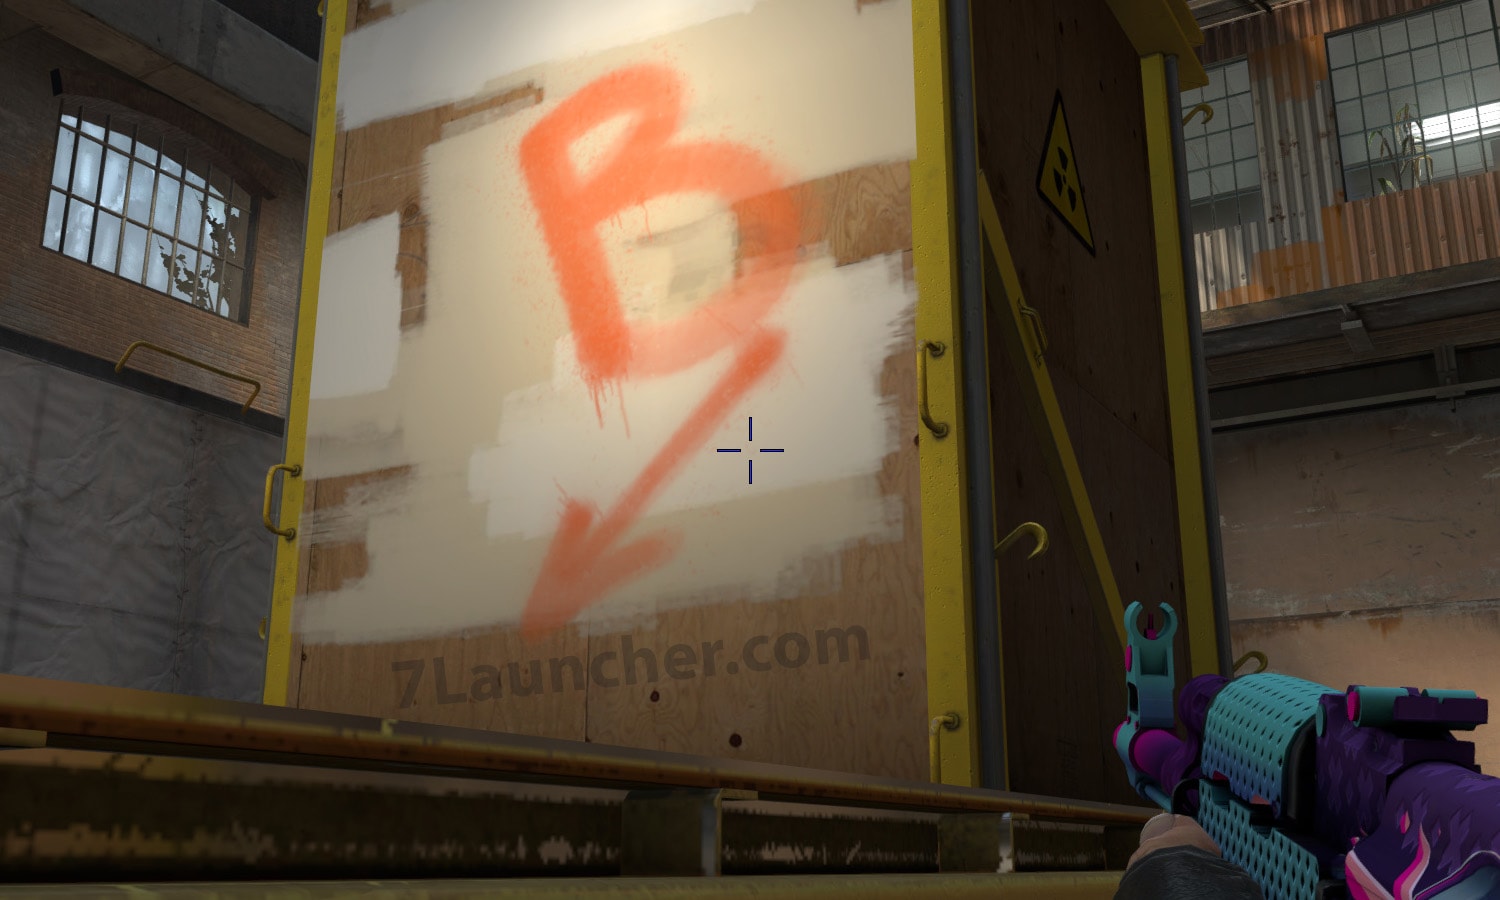 Thin outline of the crosshair